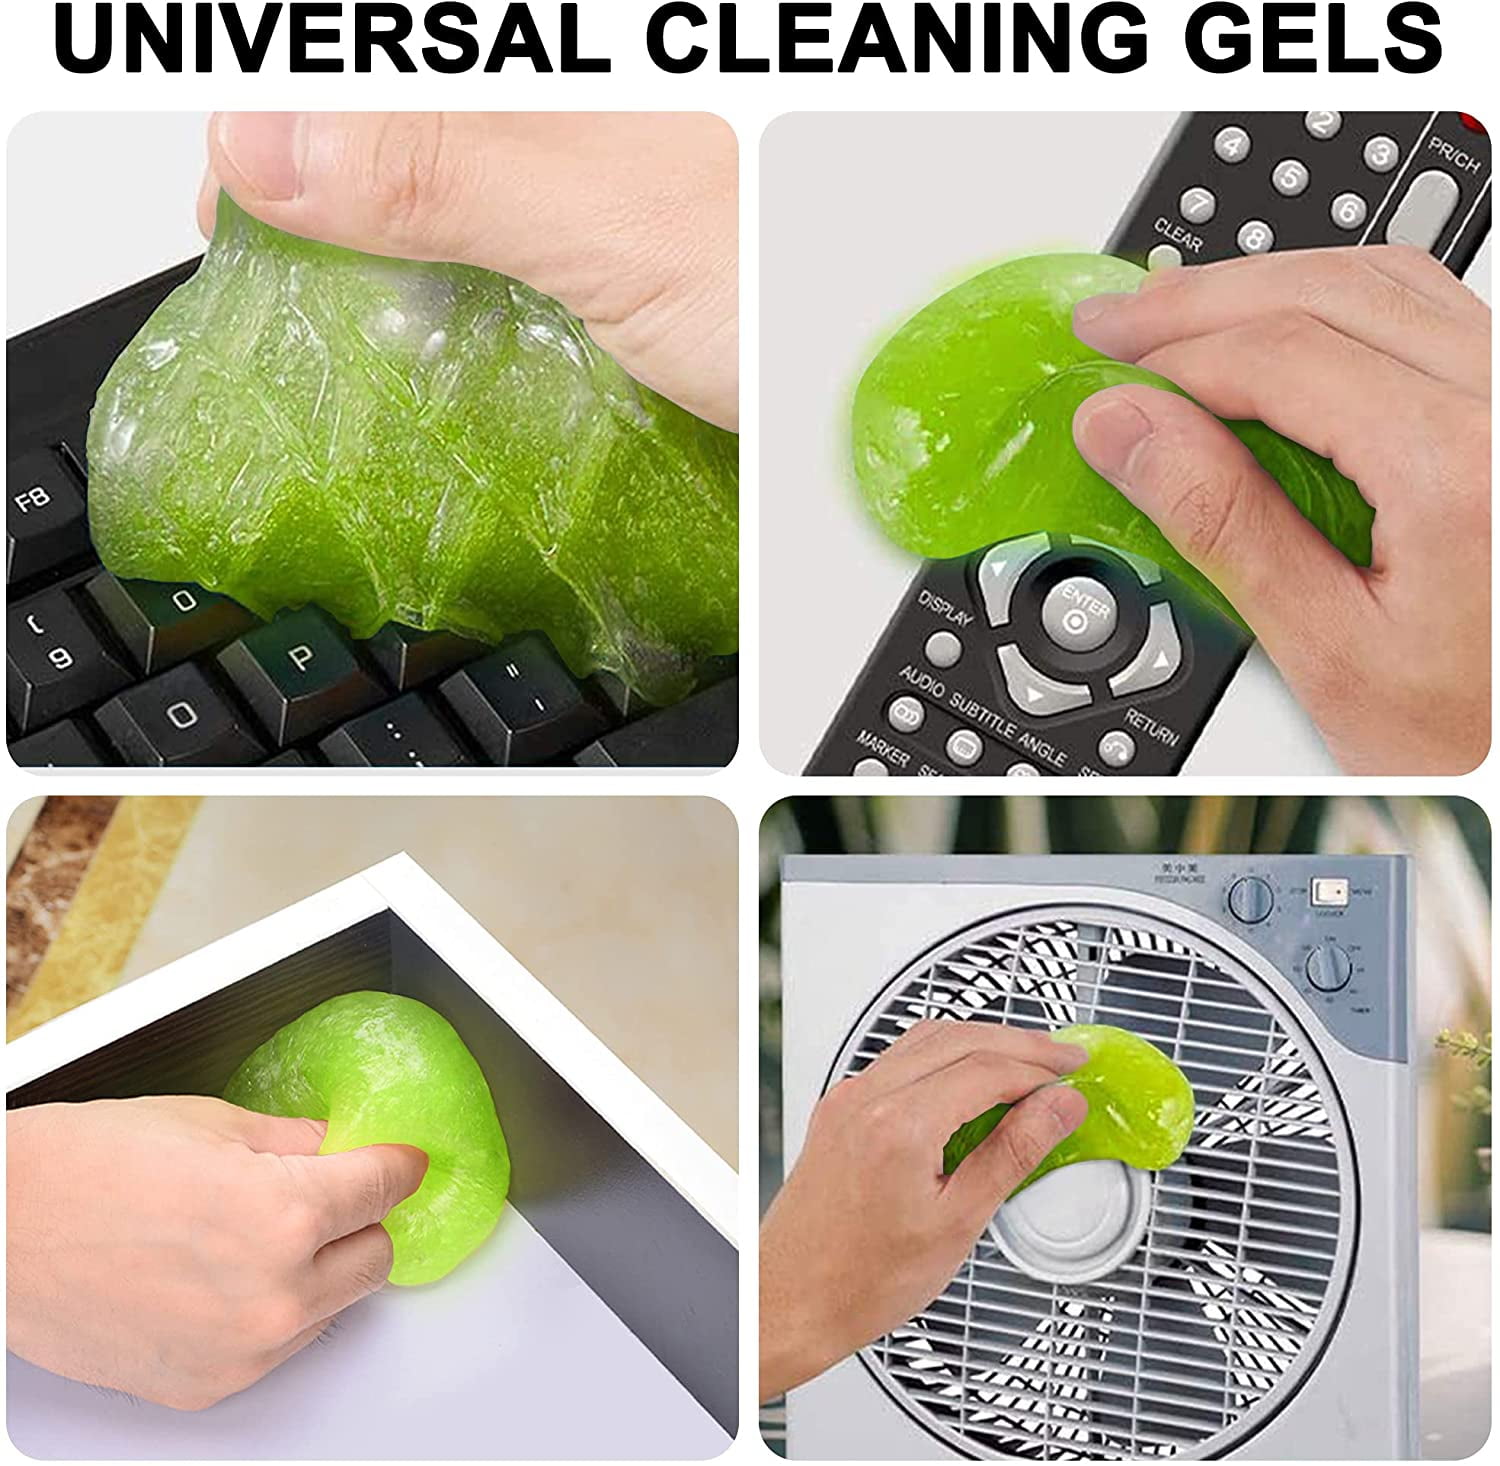  Mucjun Cleaning Gel for Car Detailing Putty Car Slime Cleaner  Auto Detailing Gel Detail Tools Car Interior Cleaner Universal Dust Removal  Gel Vent Cleaner Keyboard Laptop Cleaning Kit : Automotive